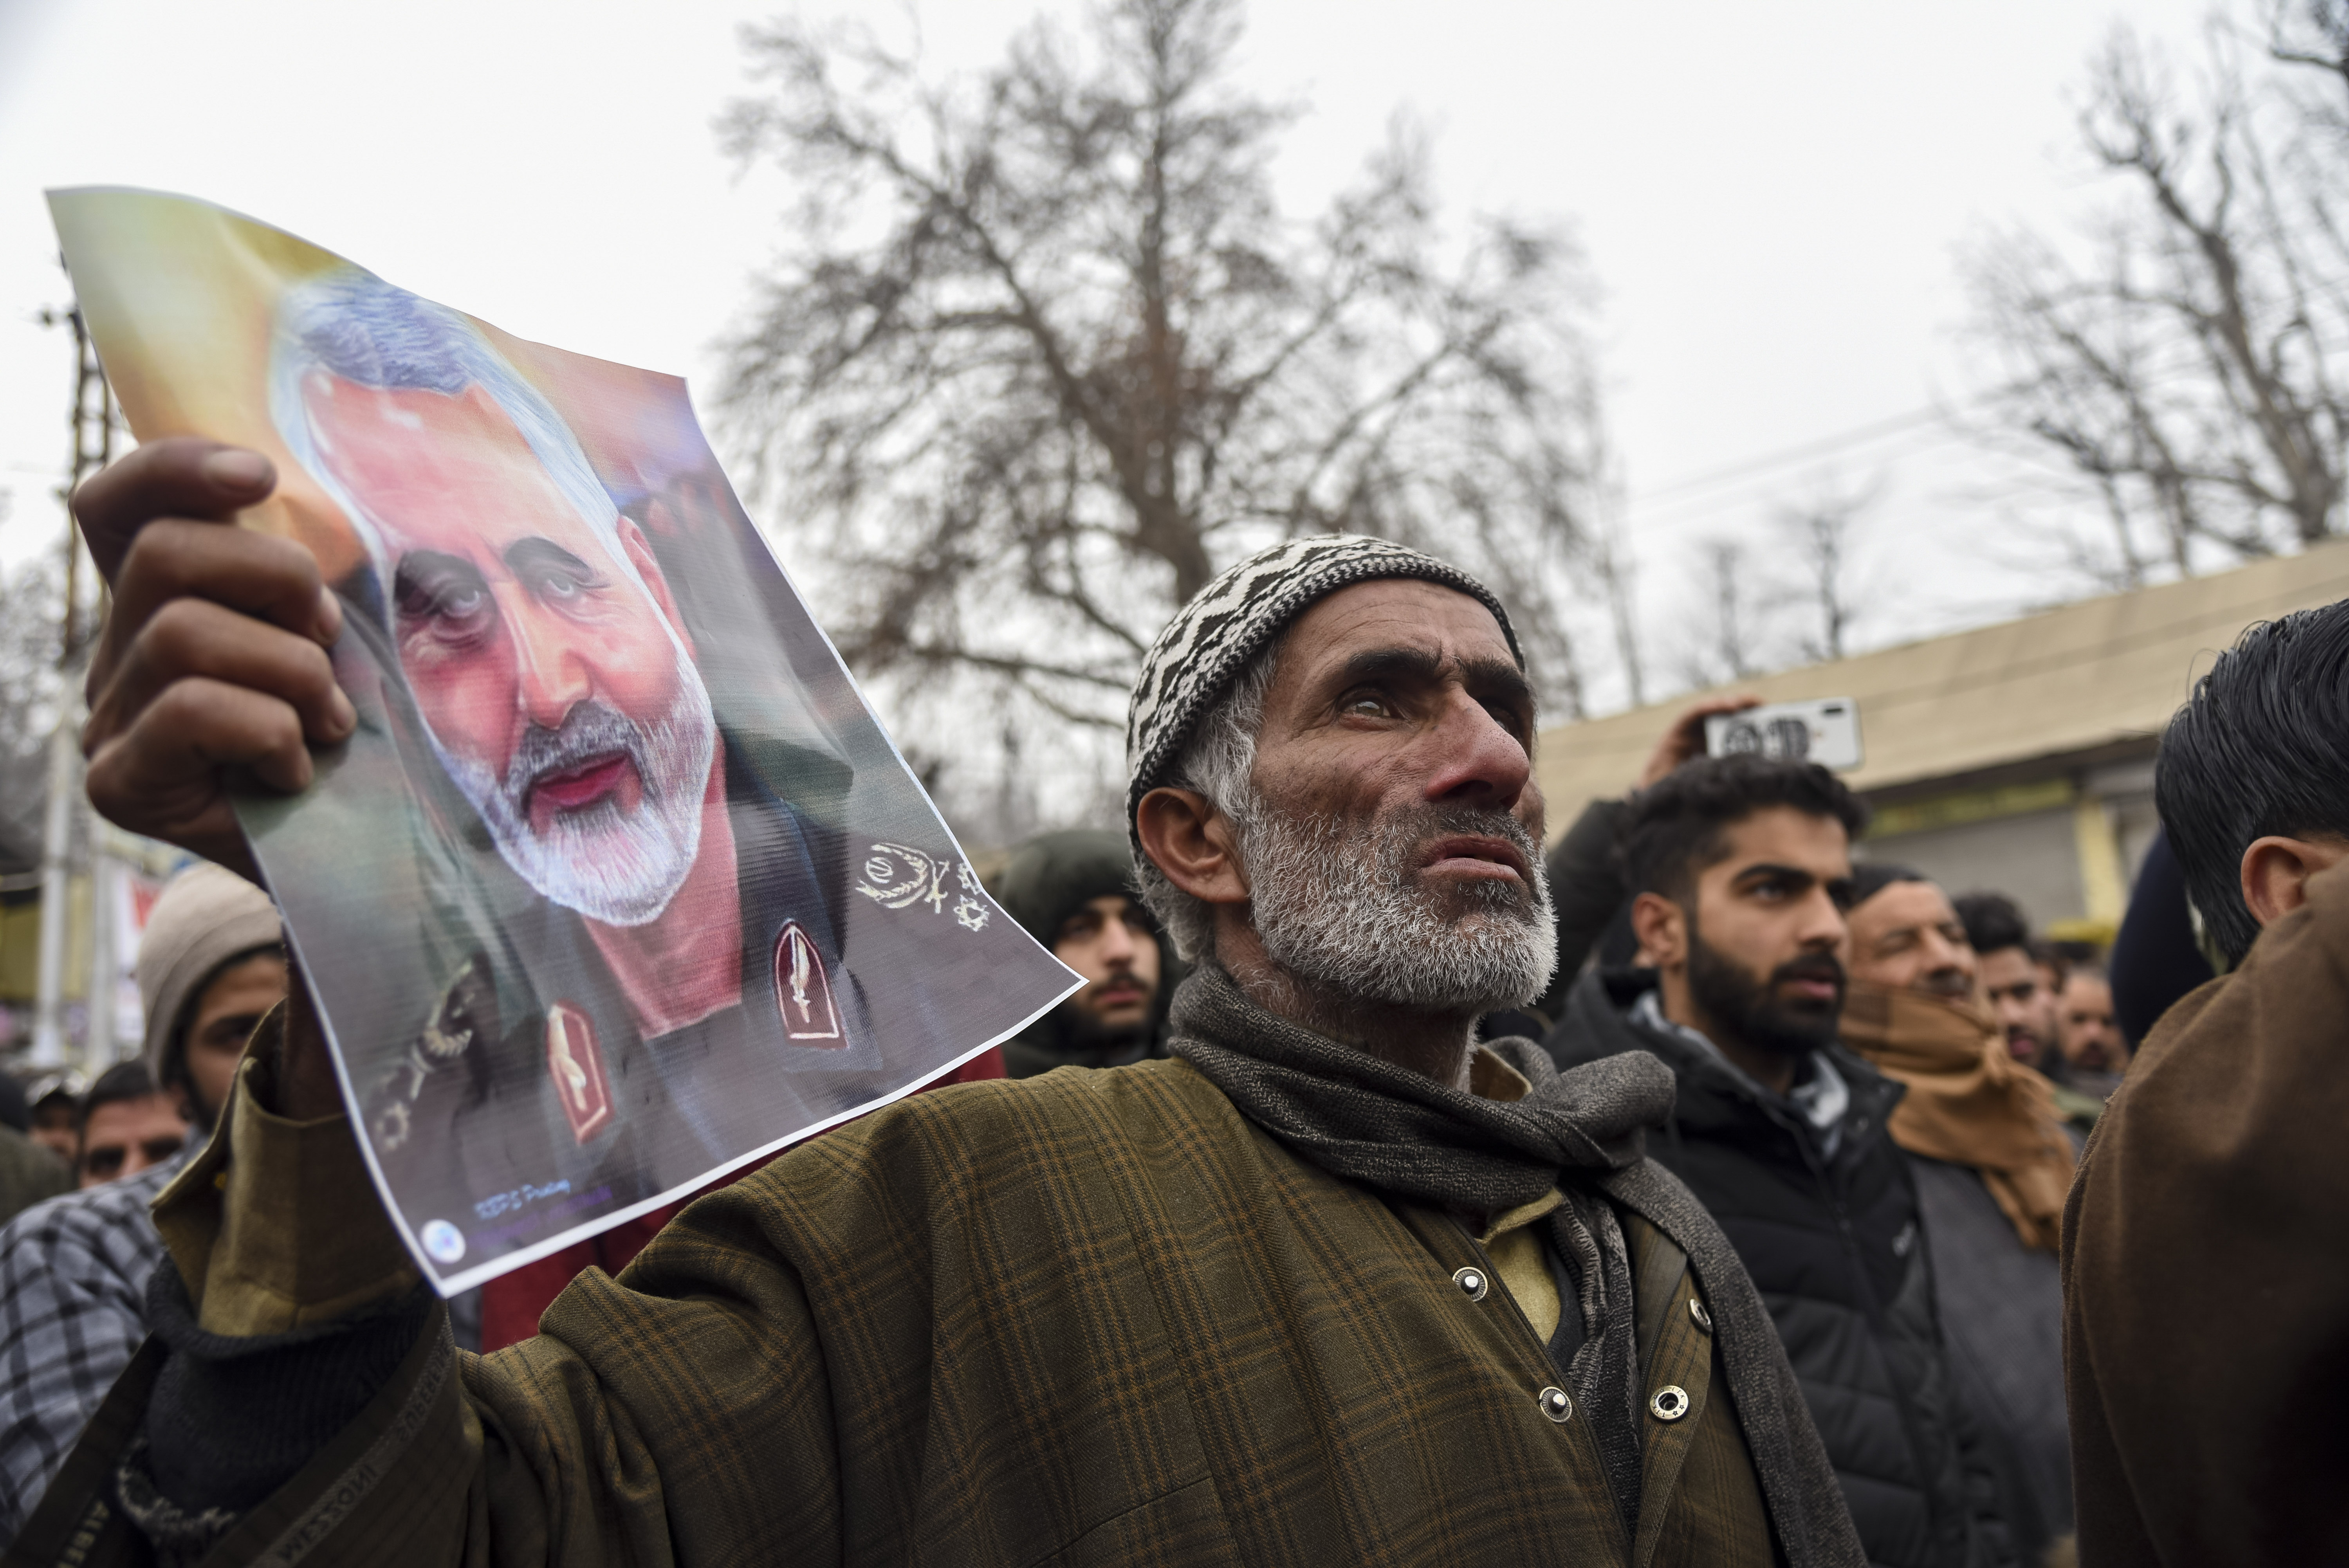 Anti-American protests after the killing of Qassim Soleimani